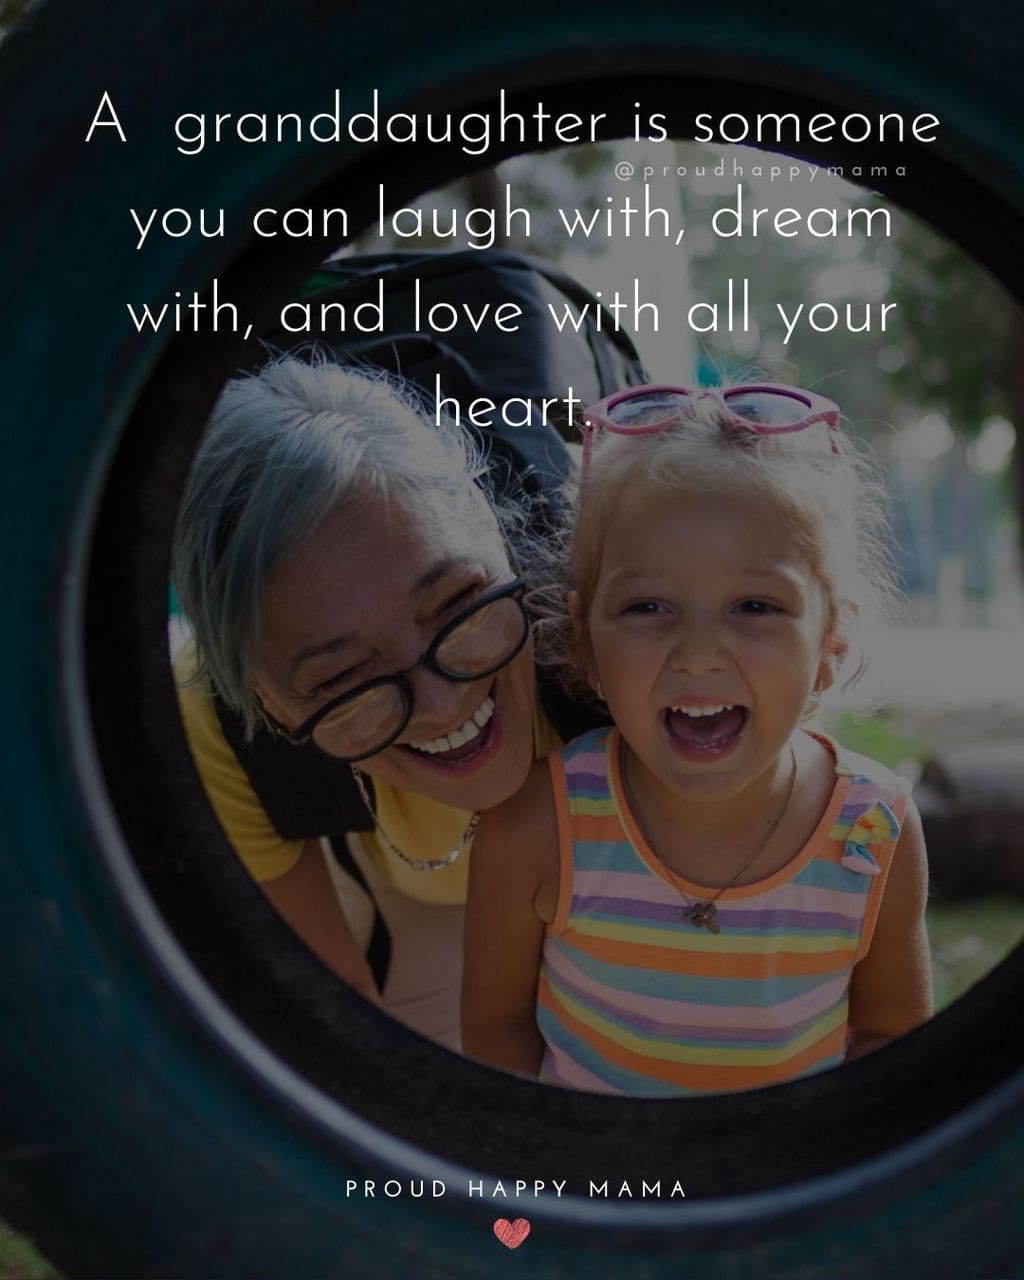 Granddaughter Quotes - A granddaughter is someone you can laugh with, dream with, and love with all your heart.